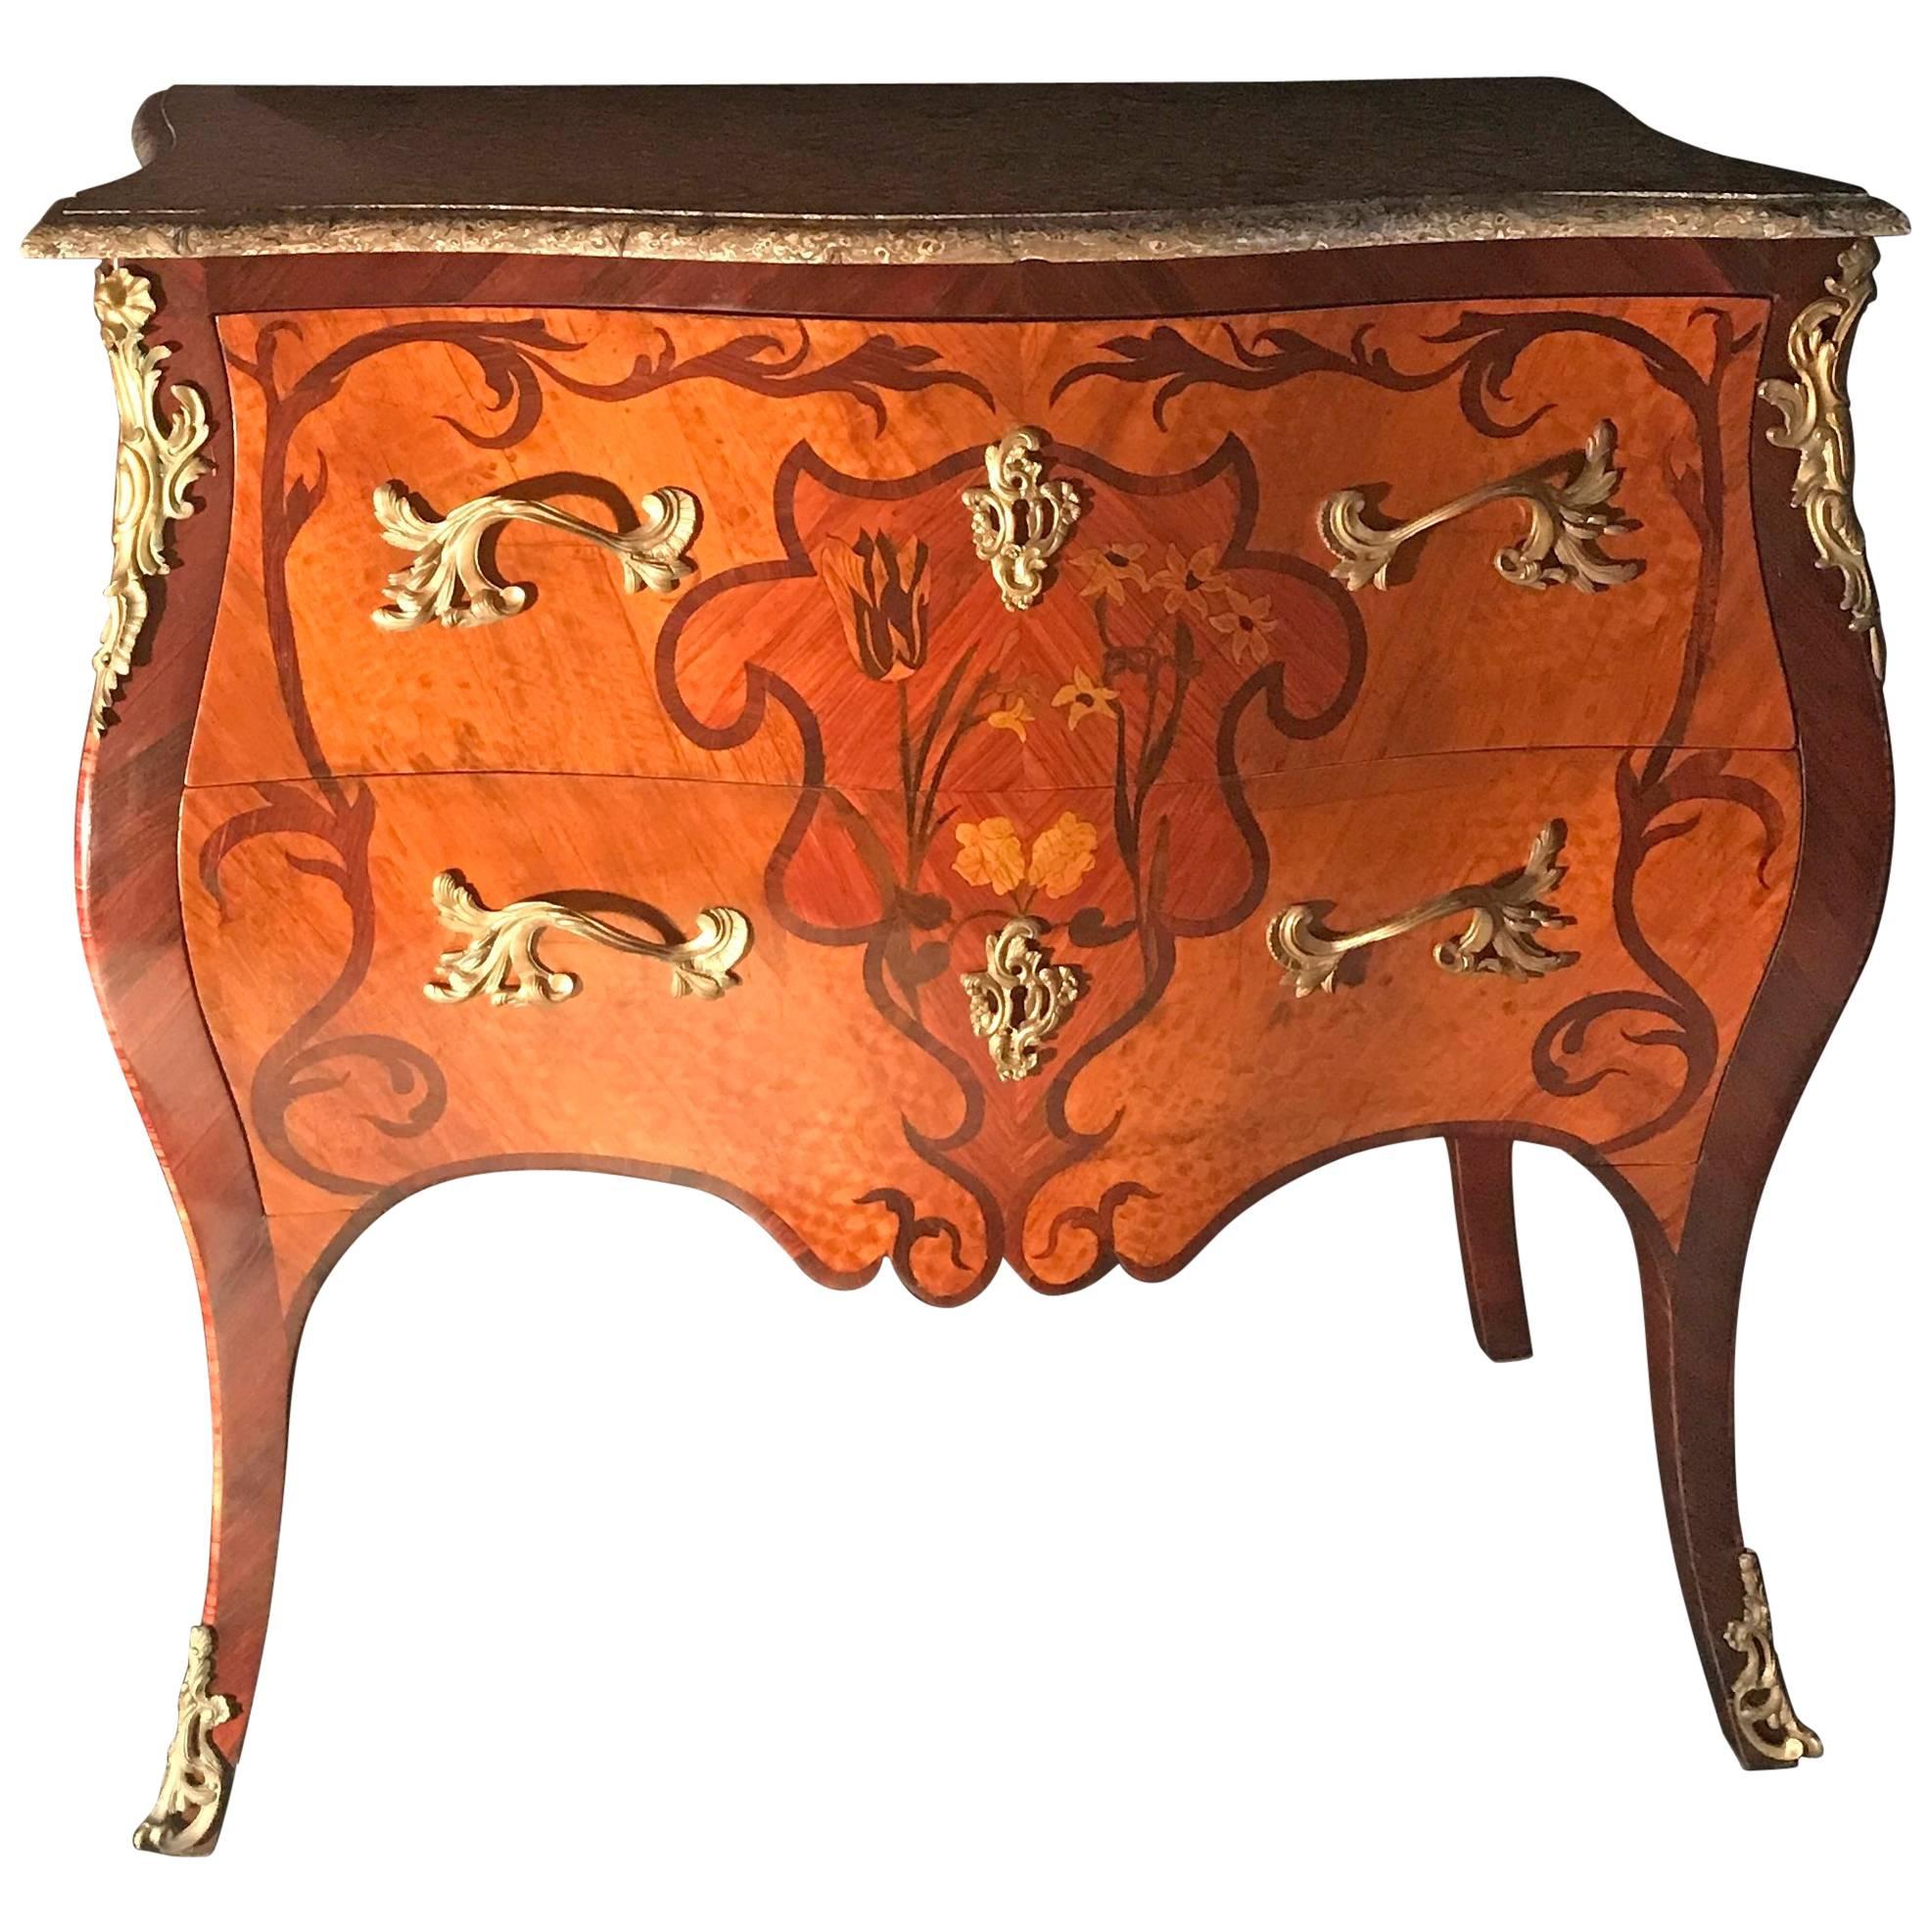 Elegant French 18th Century Commode Louis XV Period For Sale